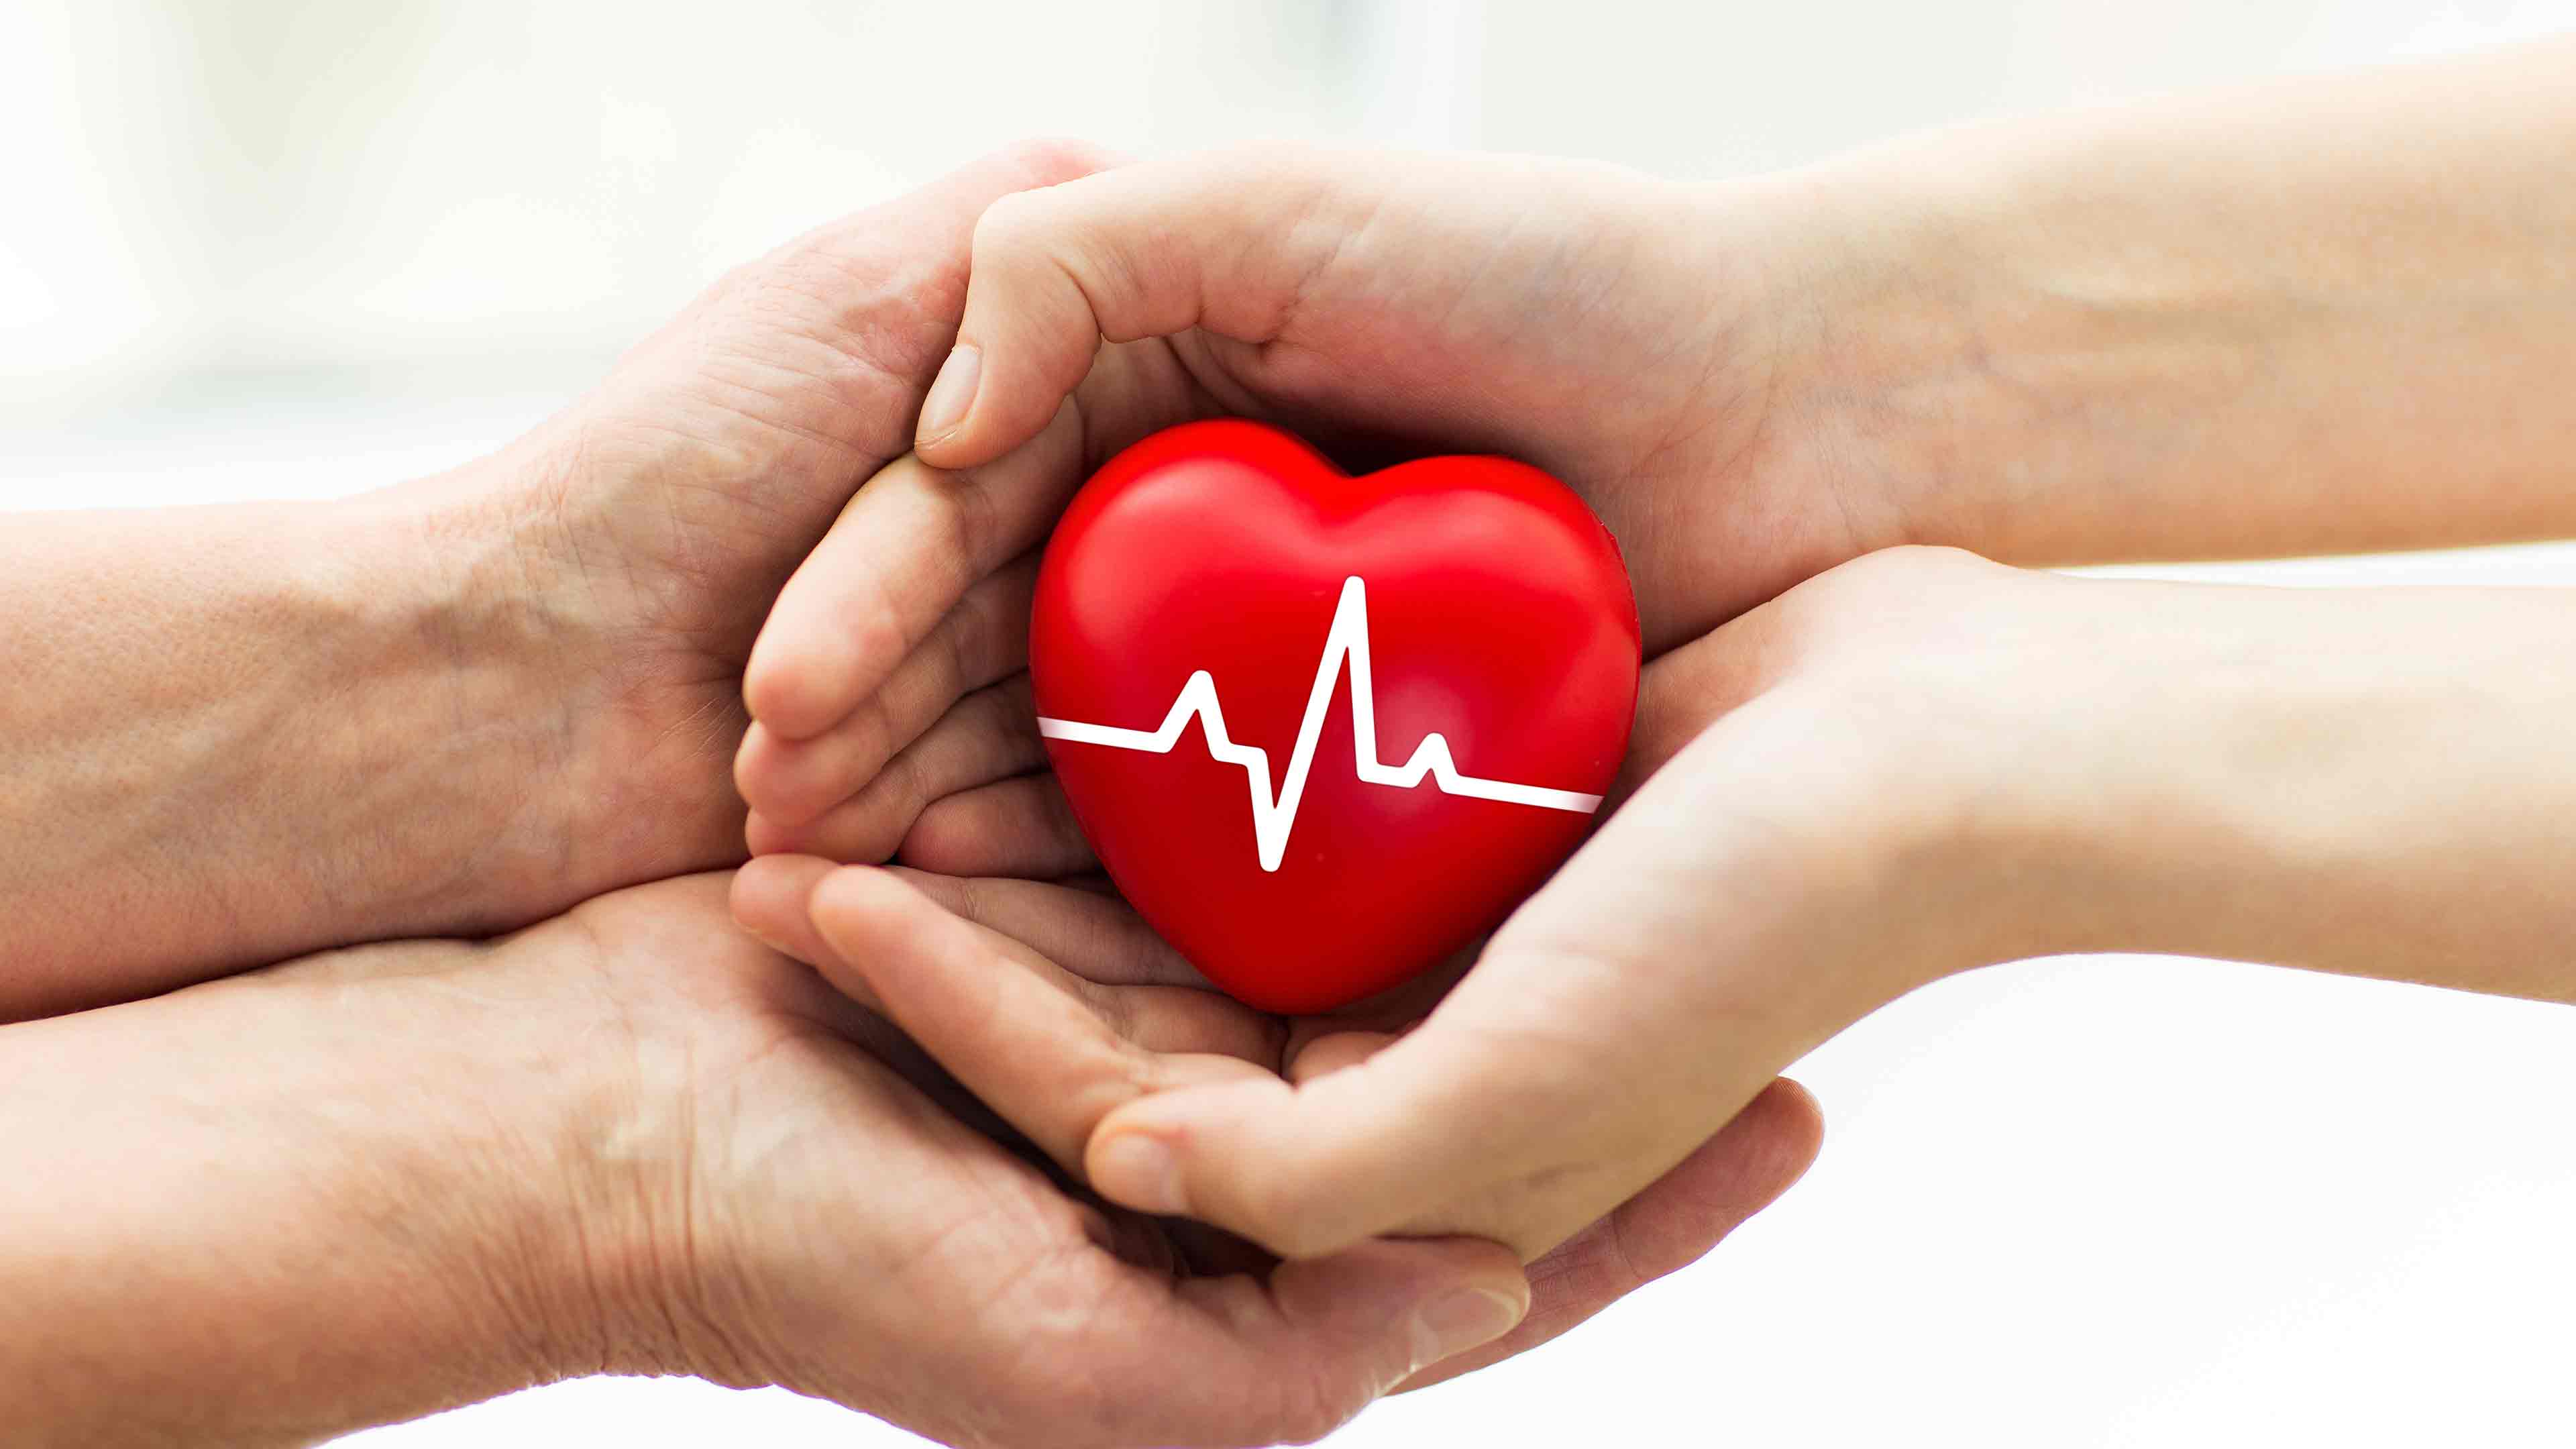 Council of Europe adopts recommendation on developing and optimising programmes for the donation of organs after the circulatory determination of death